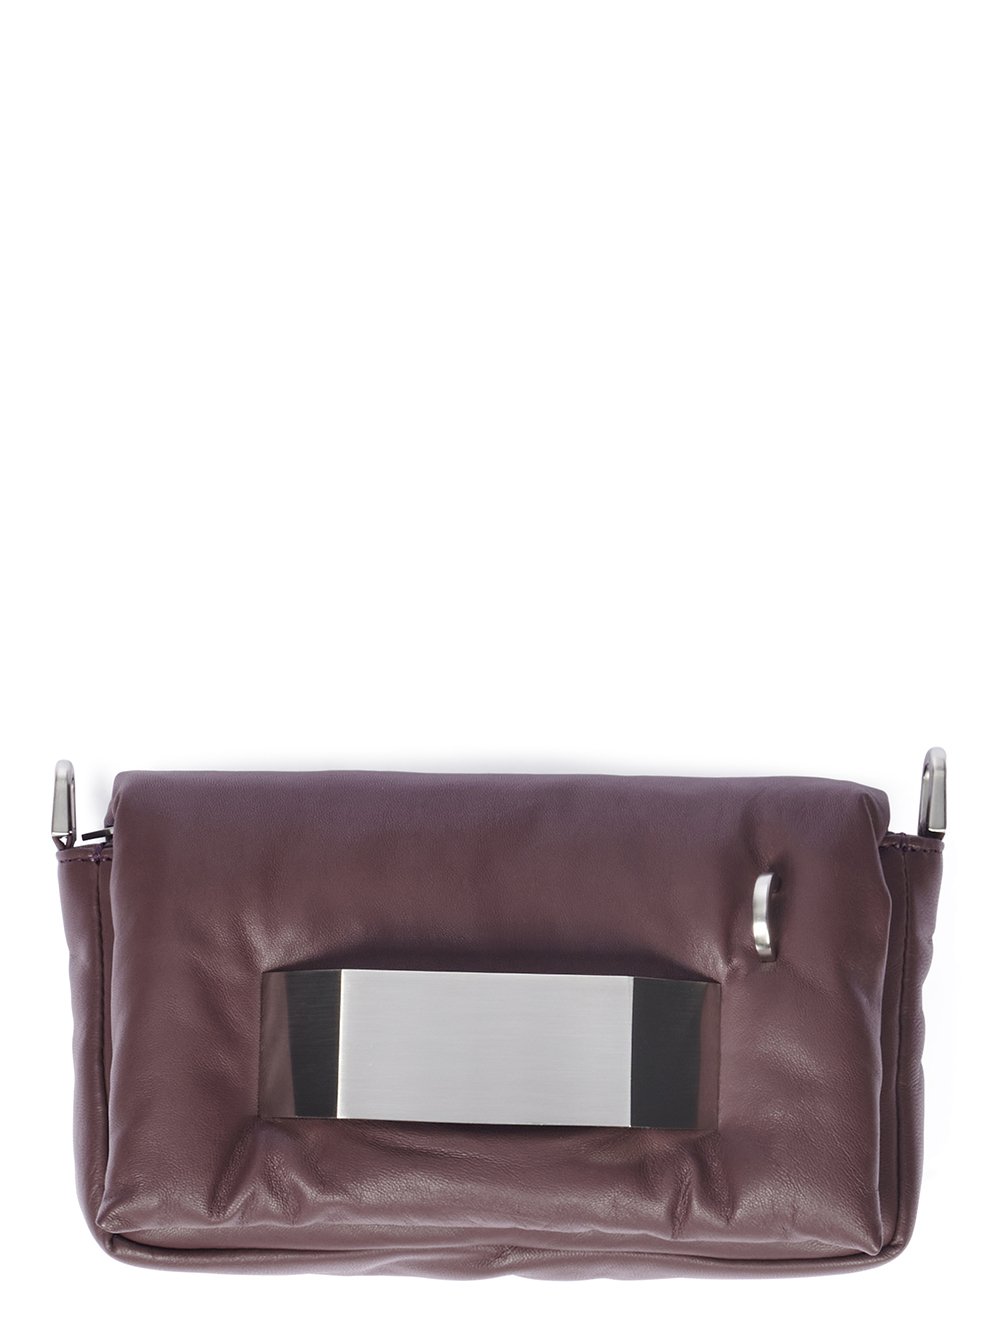 RICK OWENS FW23 LUXOR PILLOW GRIFFIN IN AMETHYST PEACHED LAMBSKIN